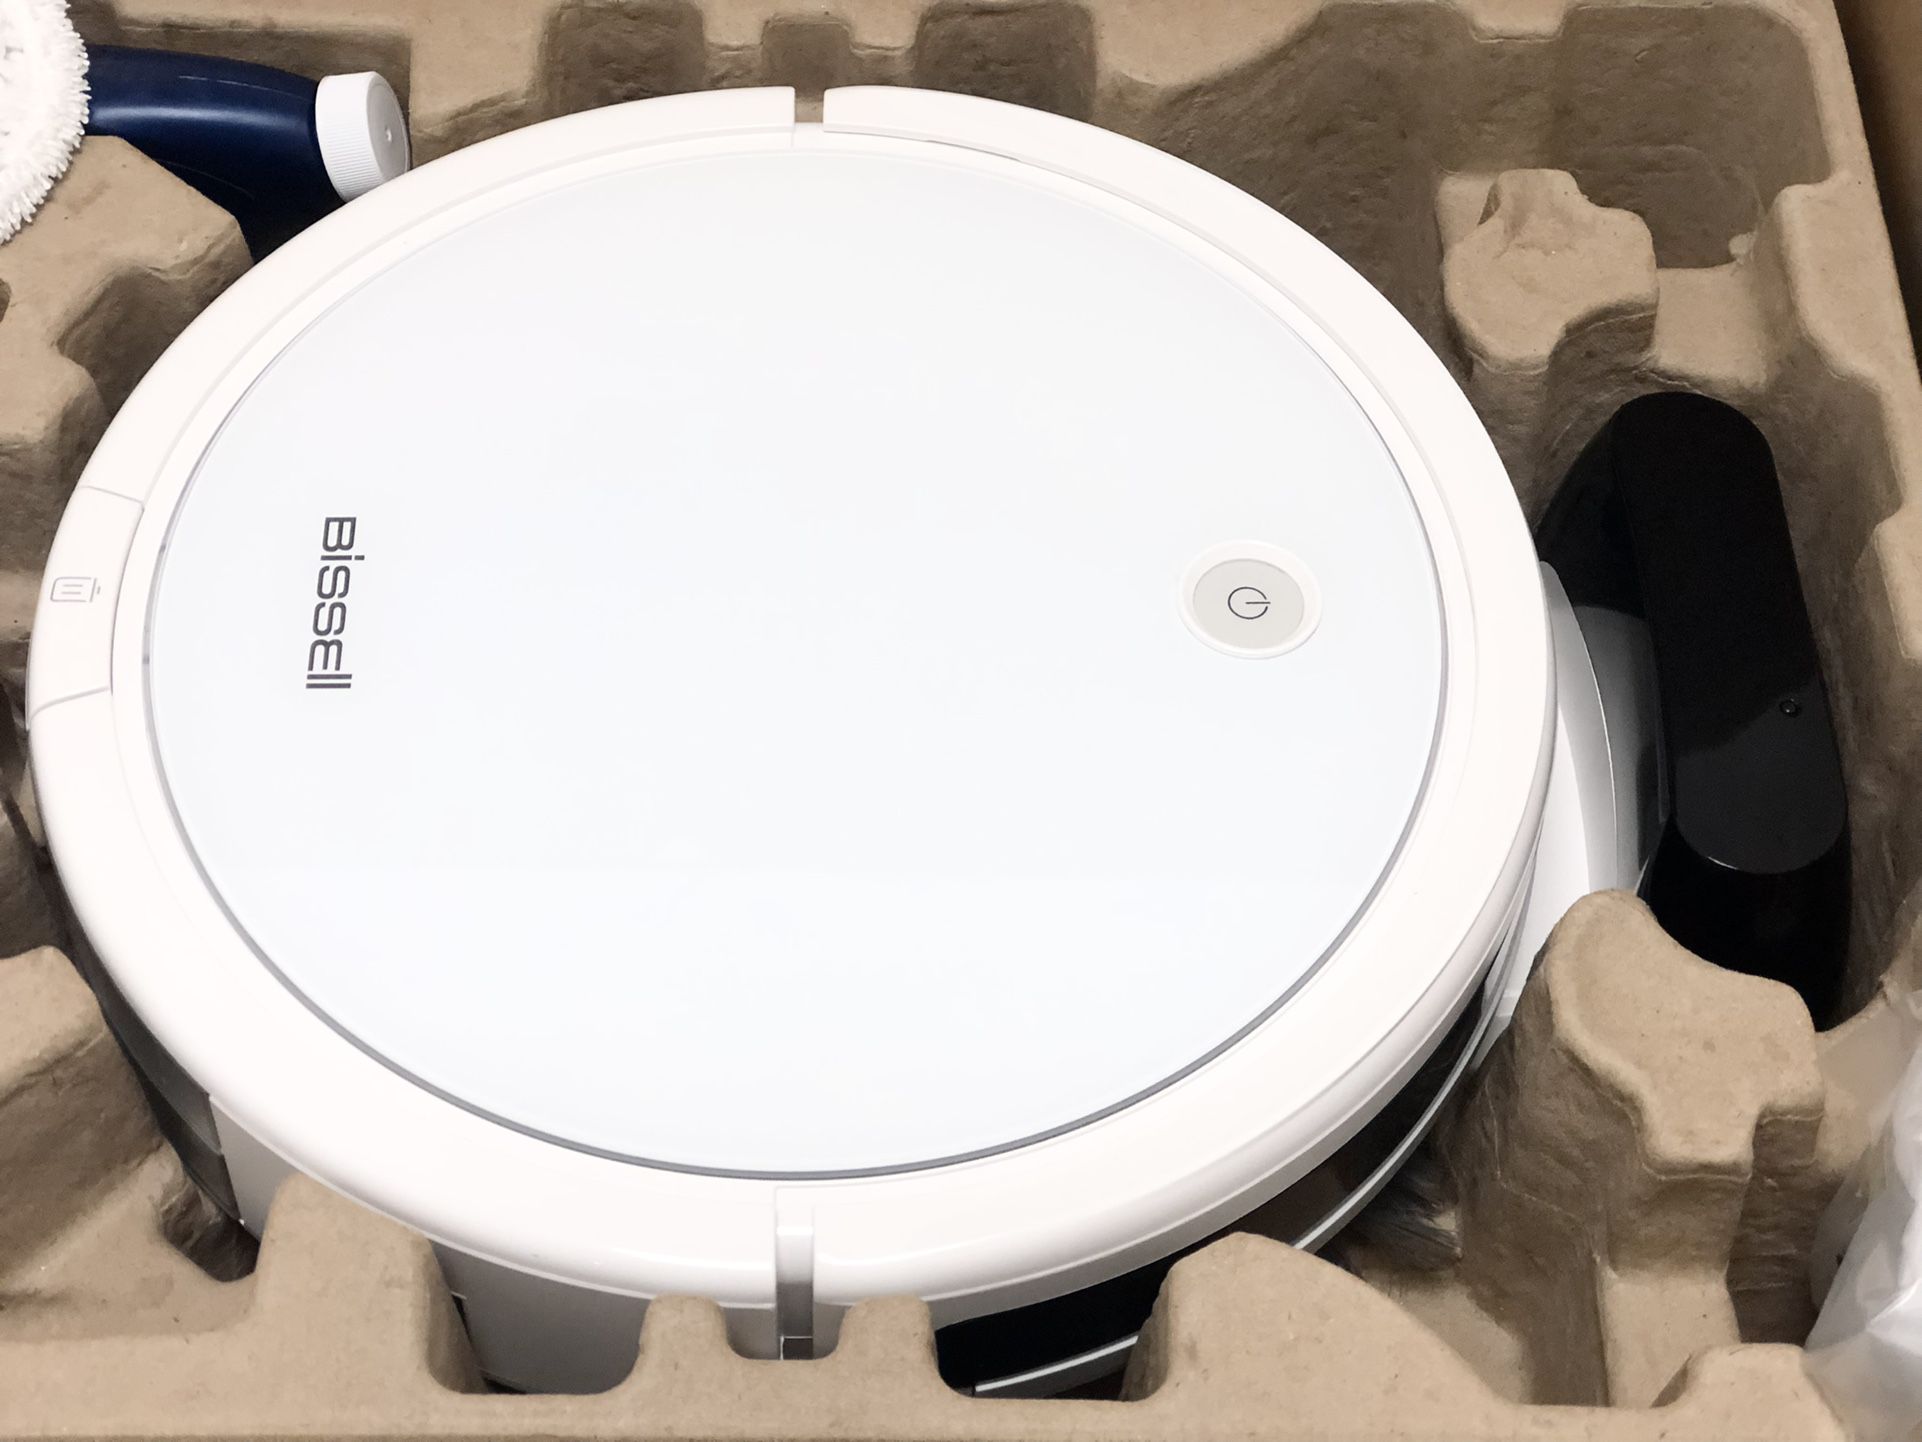 Bissell SpinWave Hard Floor Expert Pet Robot, 2-in-1 Wet Mop and Dry Robot Vacuum, WiFi Connected with Structured Navigation